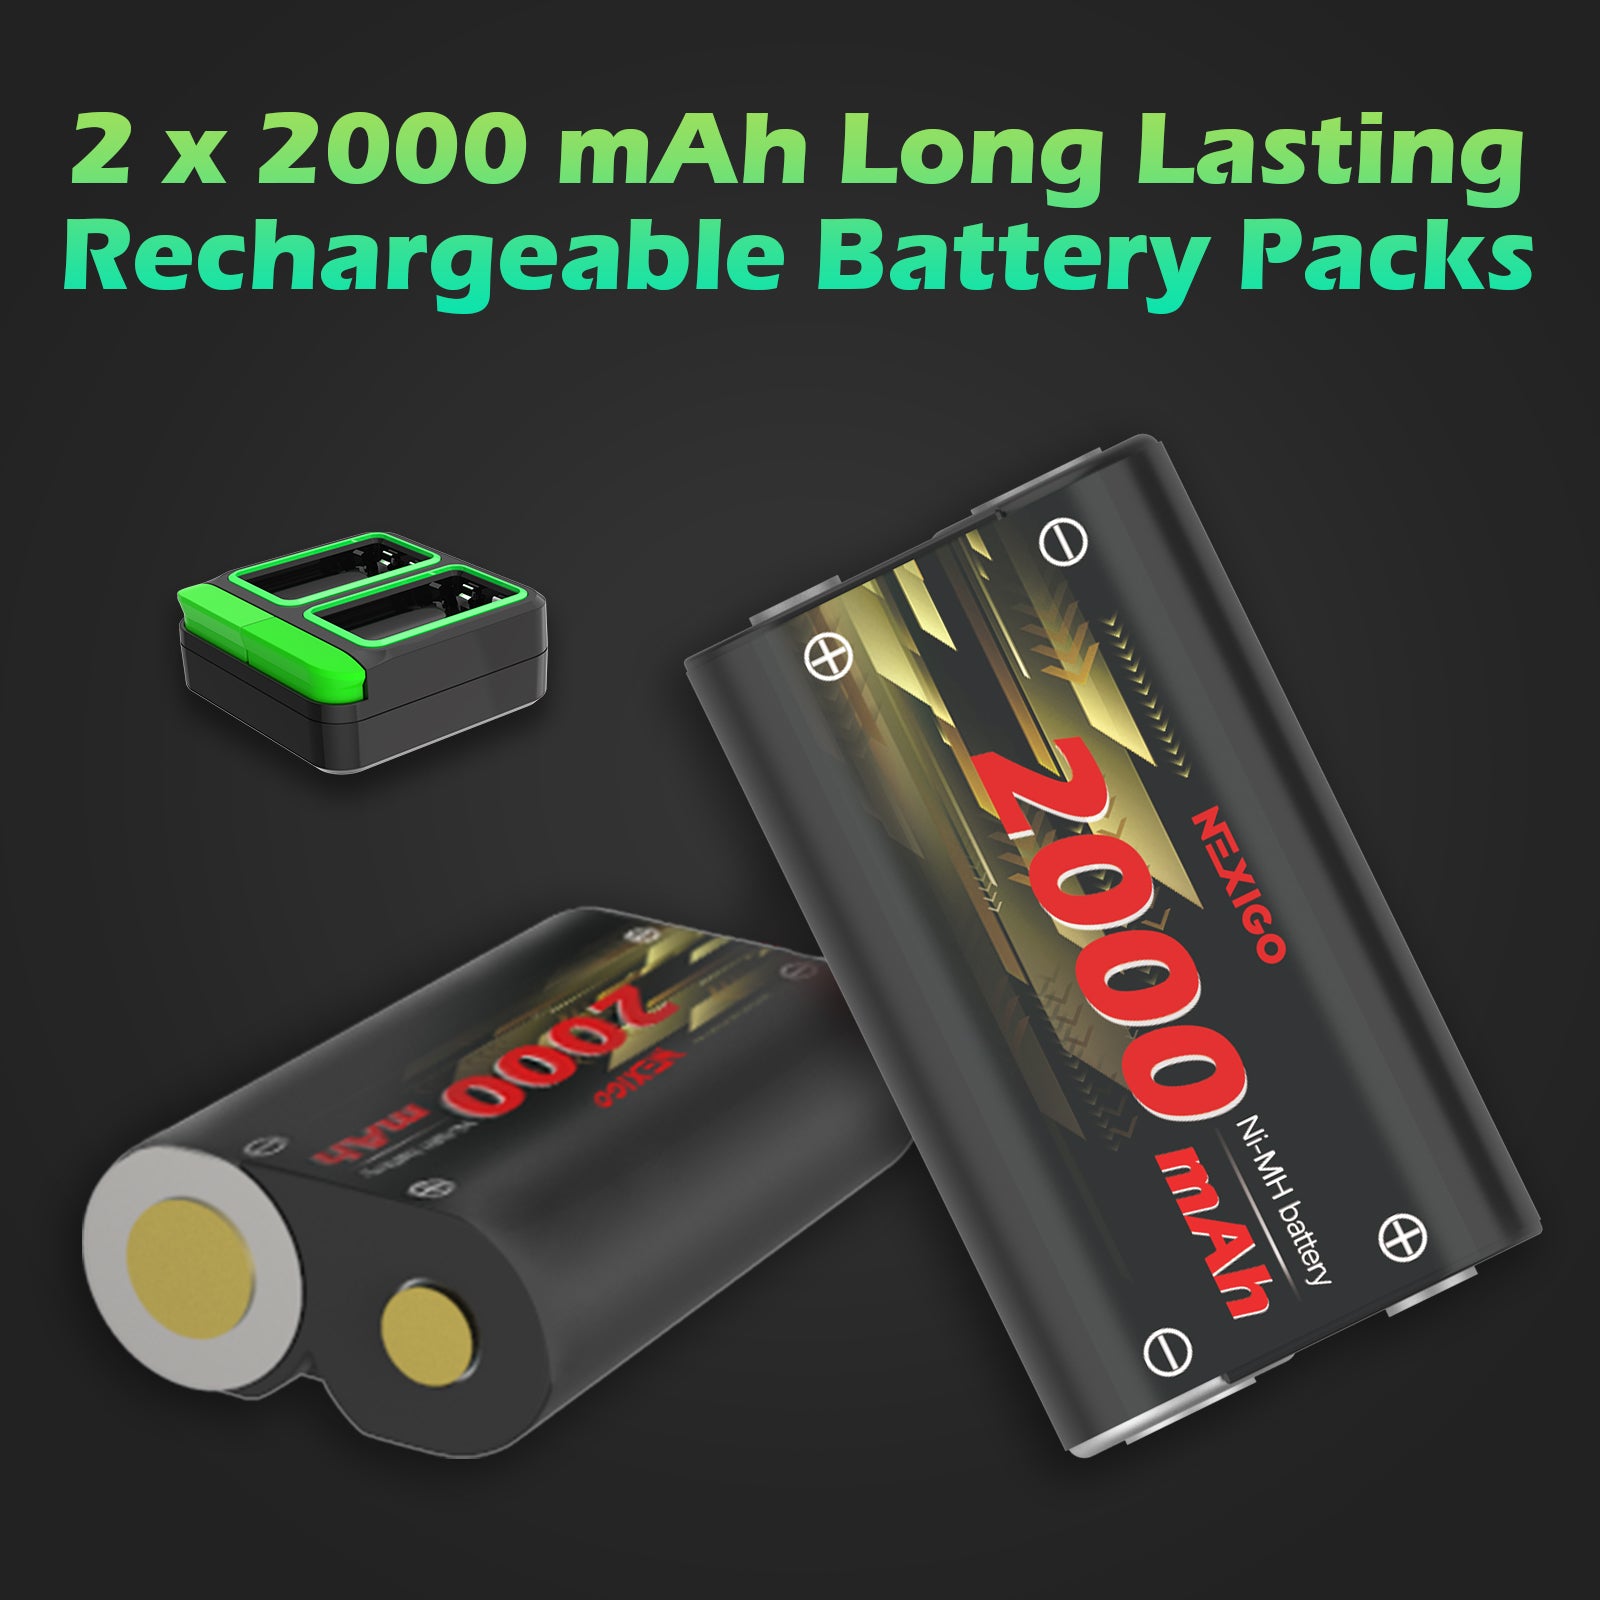 Equipped with 2x 2000mAh batteries and 1 Xbox charging station, durable and long-lasting. 